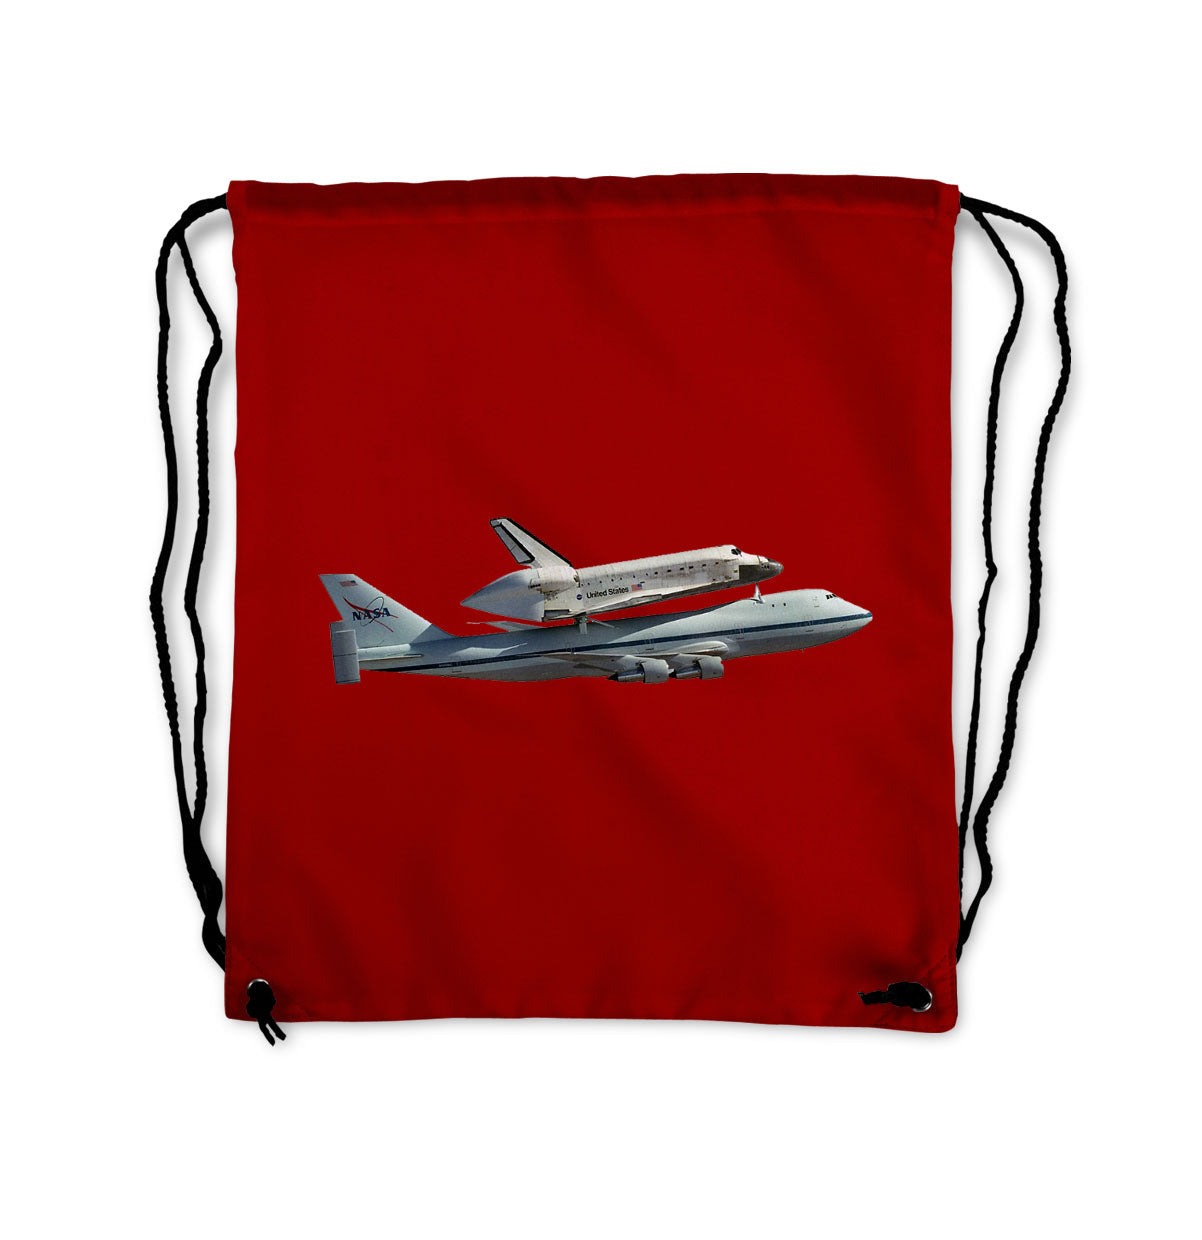 Space shuttle on 747 Designed Drawstring Bags